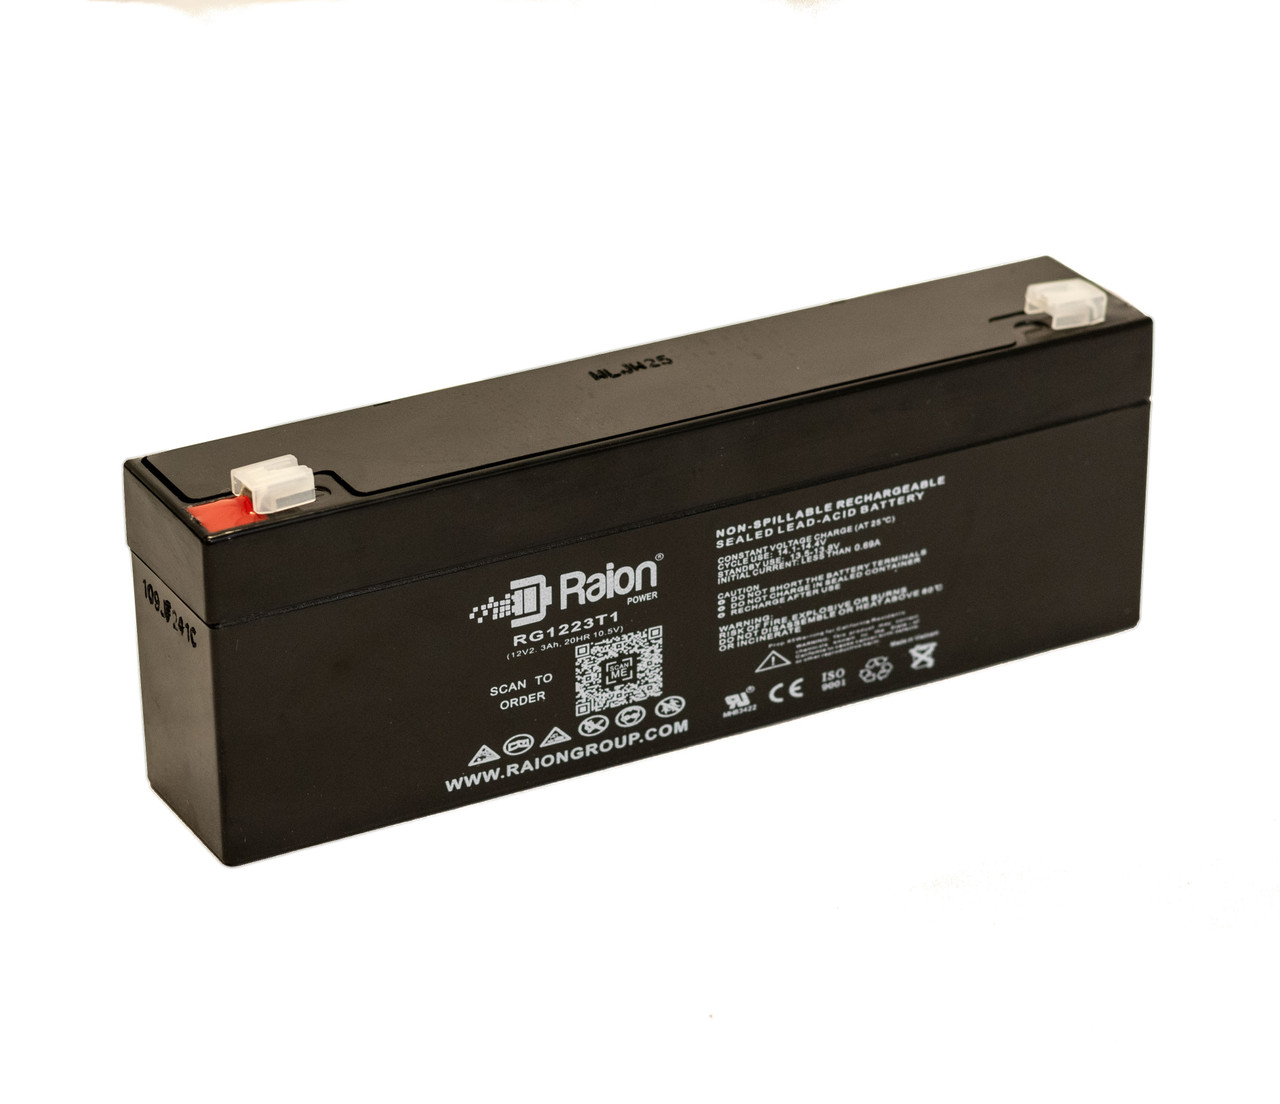 Raion Power RG1223T1 Replacement Battery for Brentwood Instruments LS285 Defib